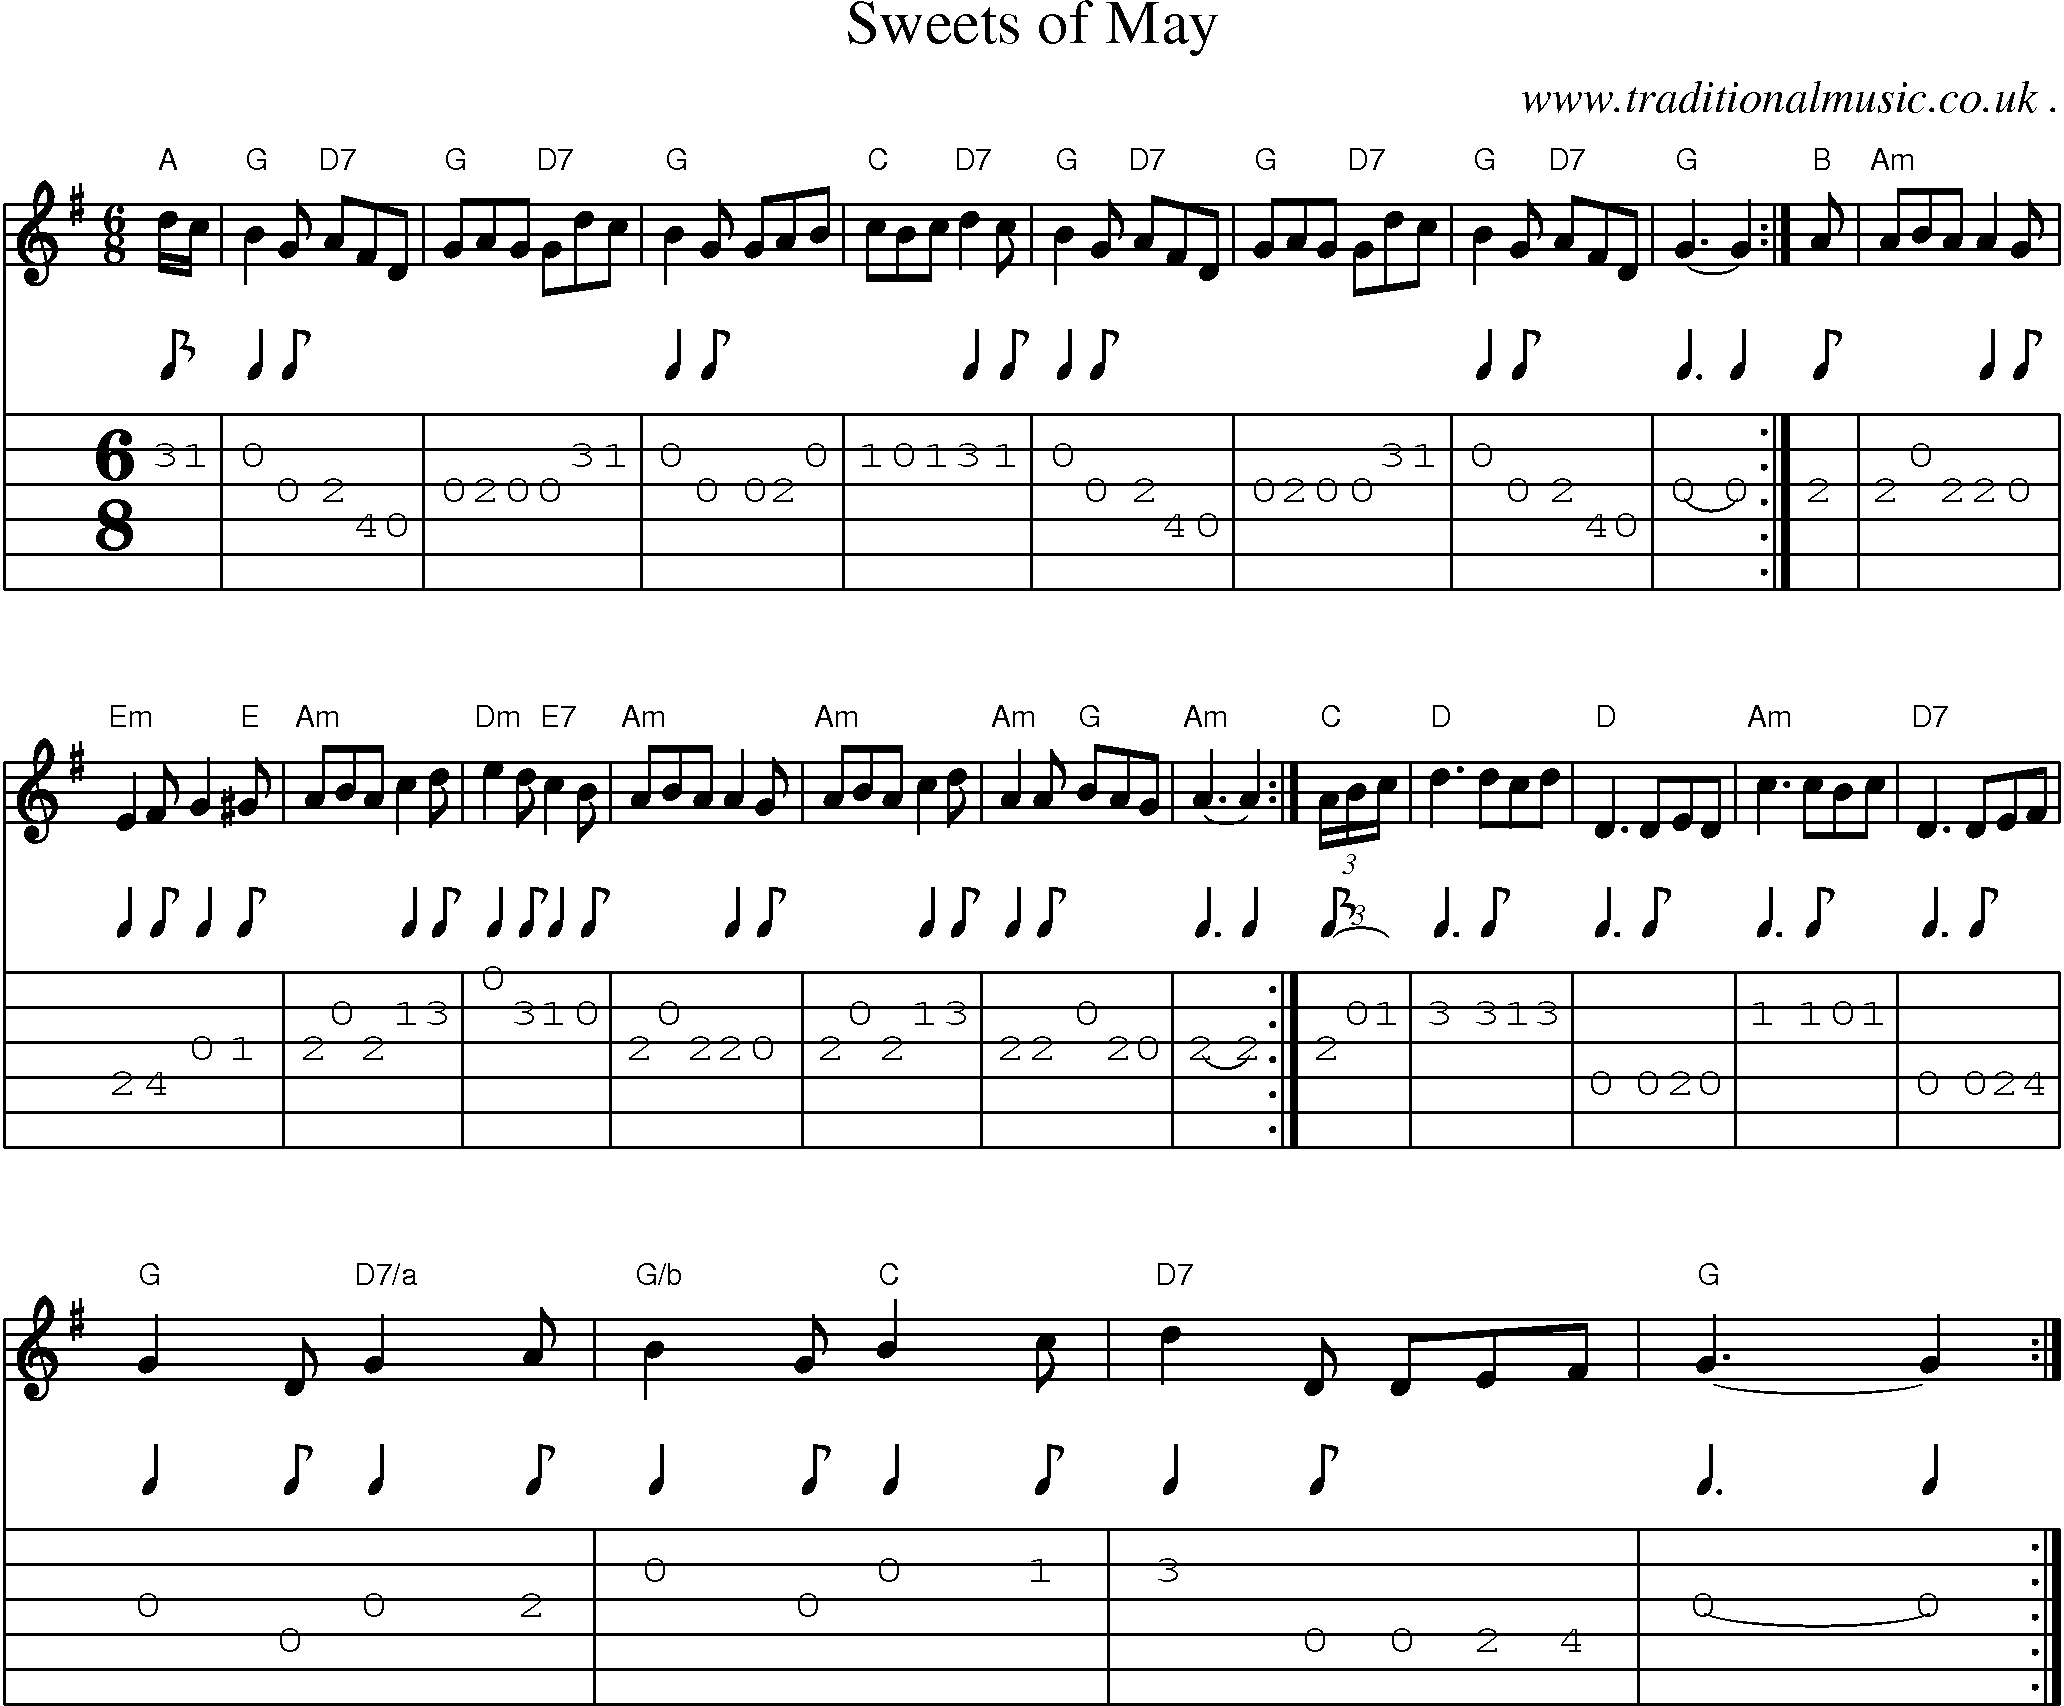 Sheet-music  score, Chords and Guitar Tabs for Sweets Of May